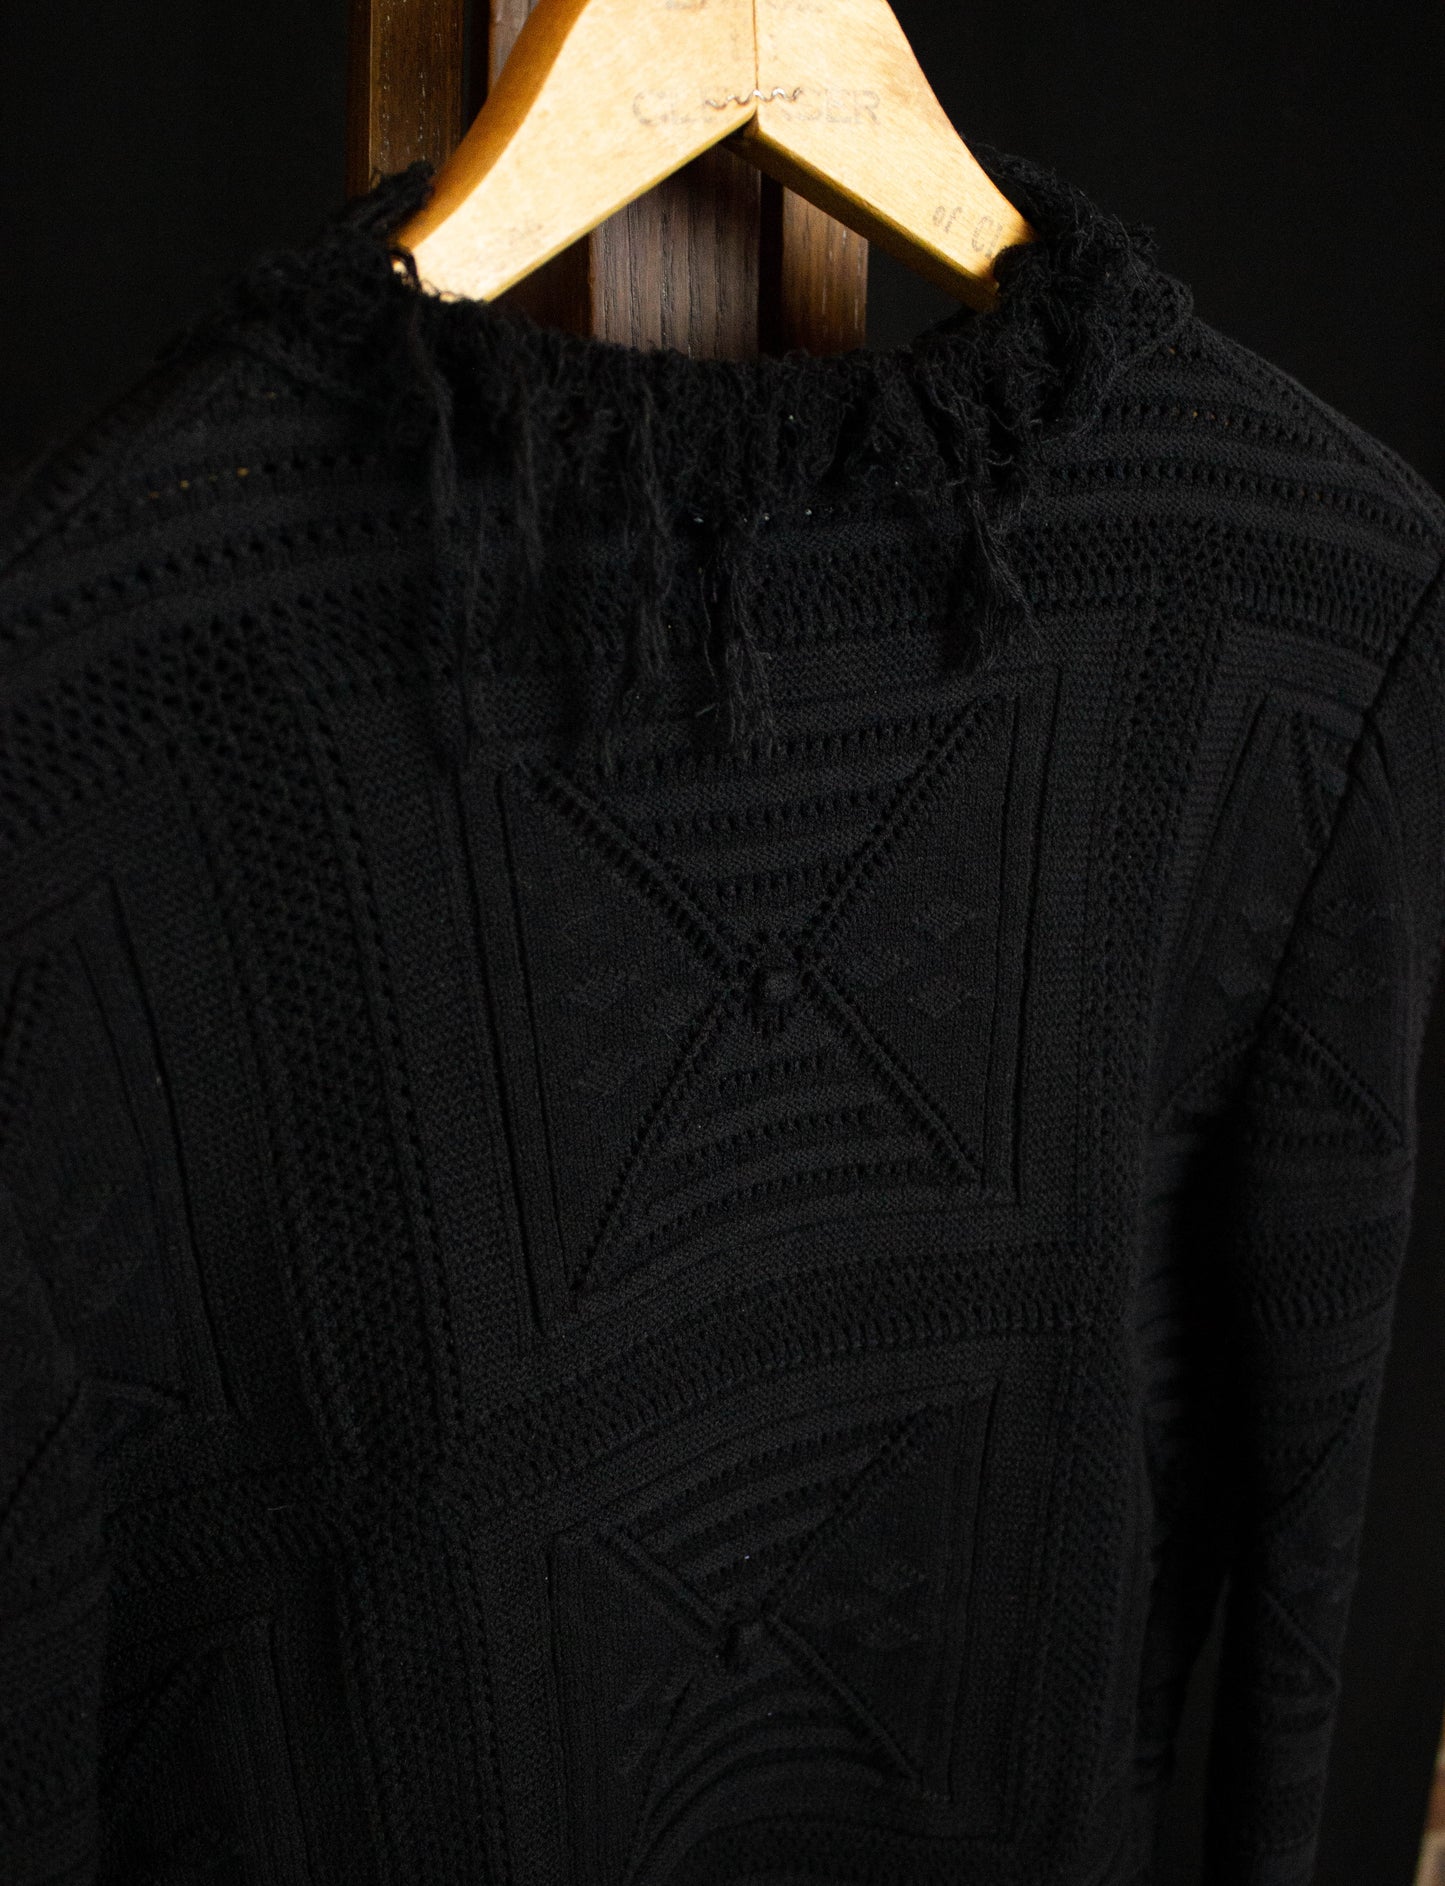 Vintage 90s Chanel Black Woven Cardigan Sweater XS